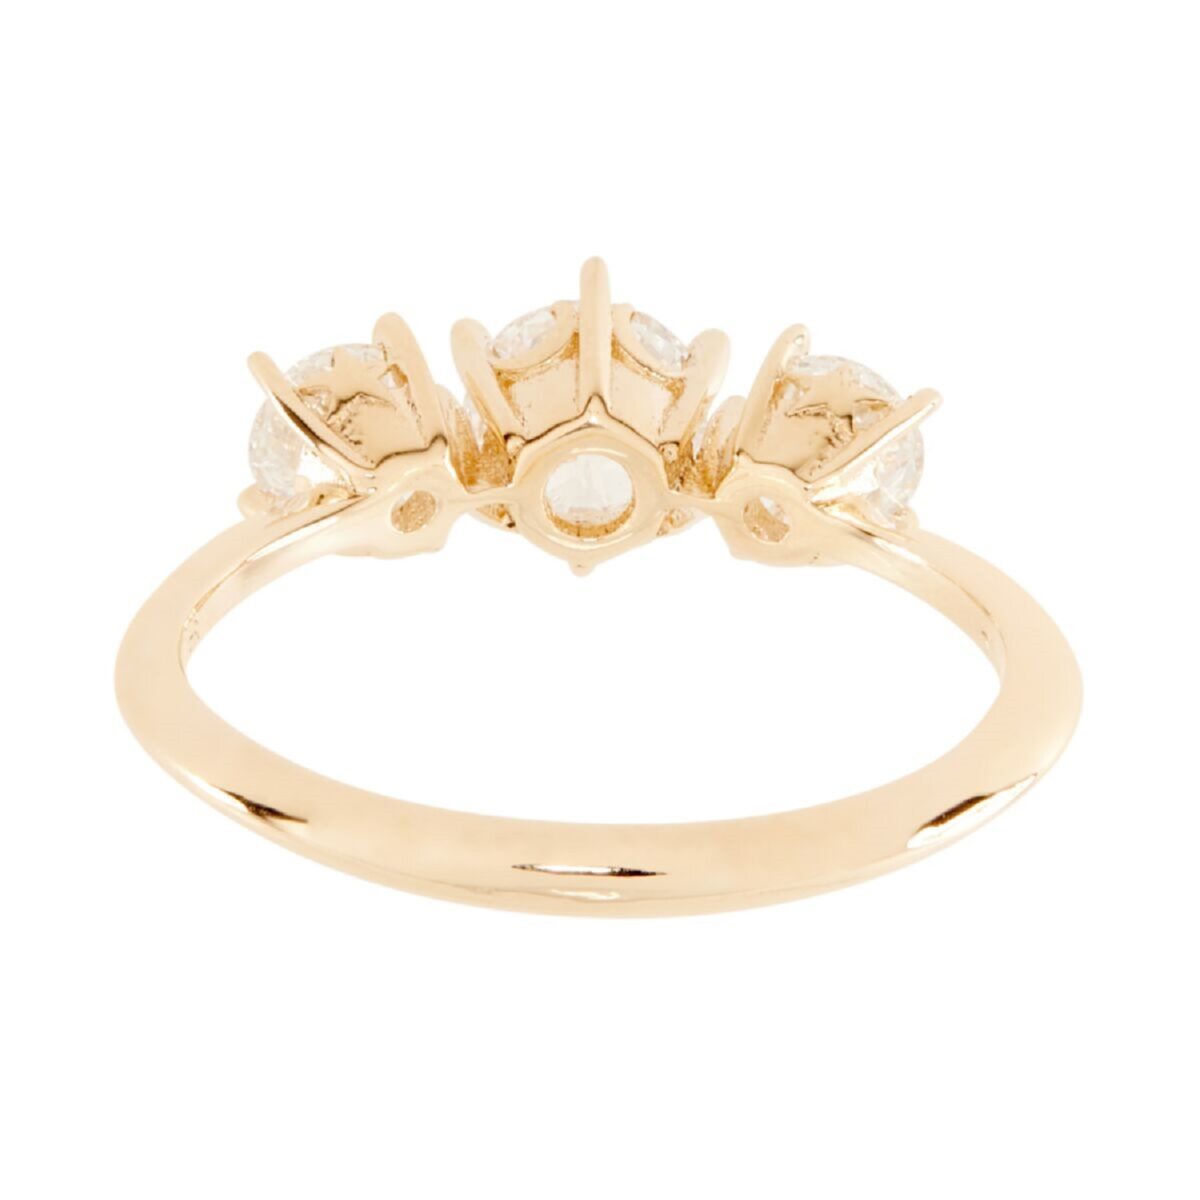 Trinity round cut lab grown diamond ring crafted in 14k yellow gold.